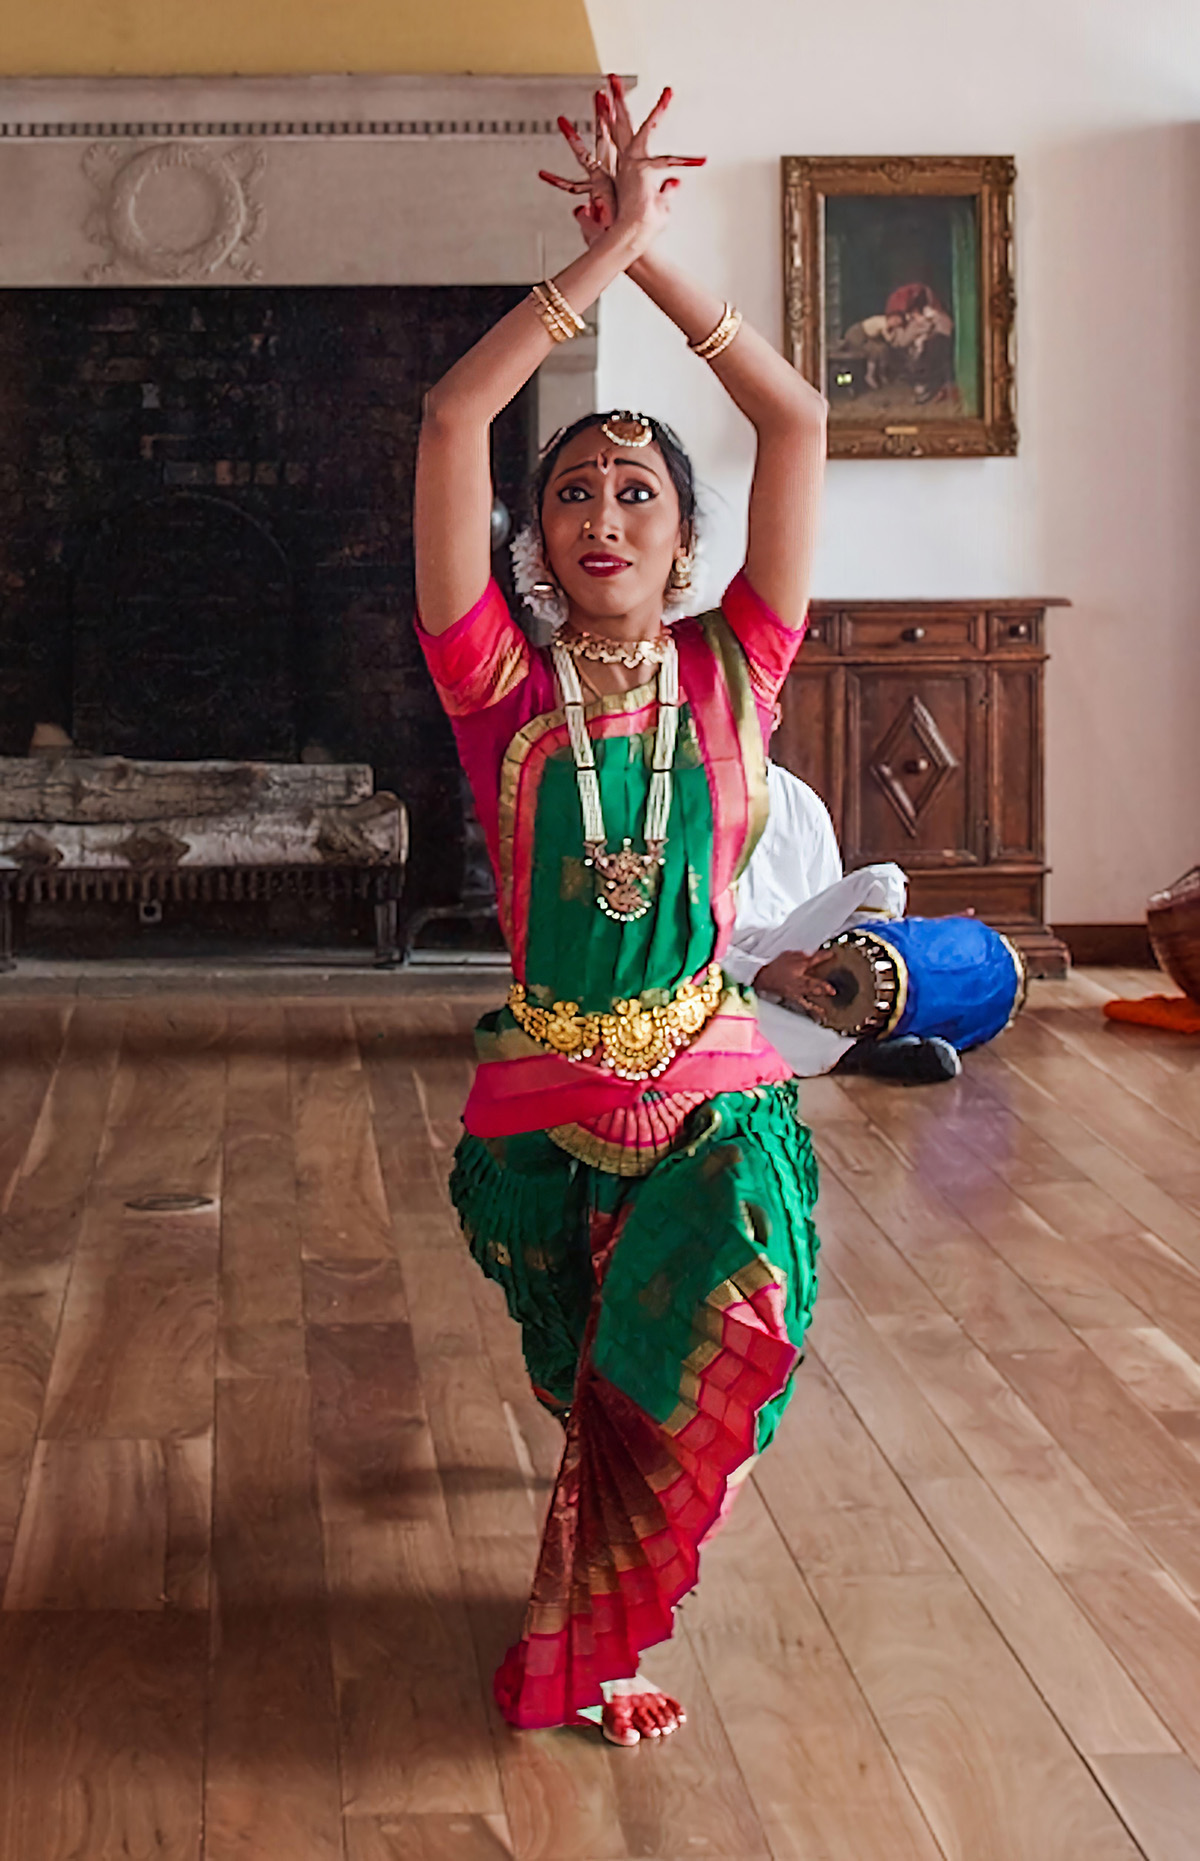 Lavanyaa Surendar shares the legacy of classical Indian music and dance. (Source: Re/sound: Songs of Wisconsin.)